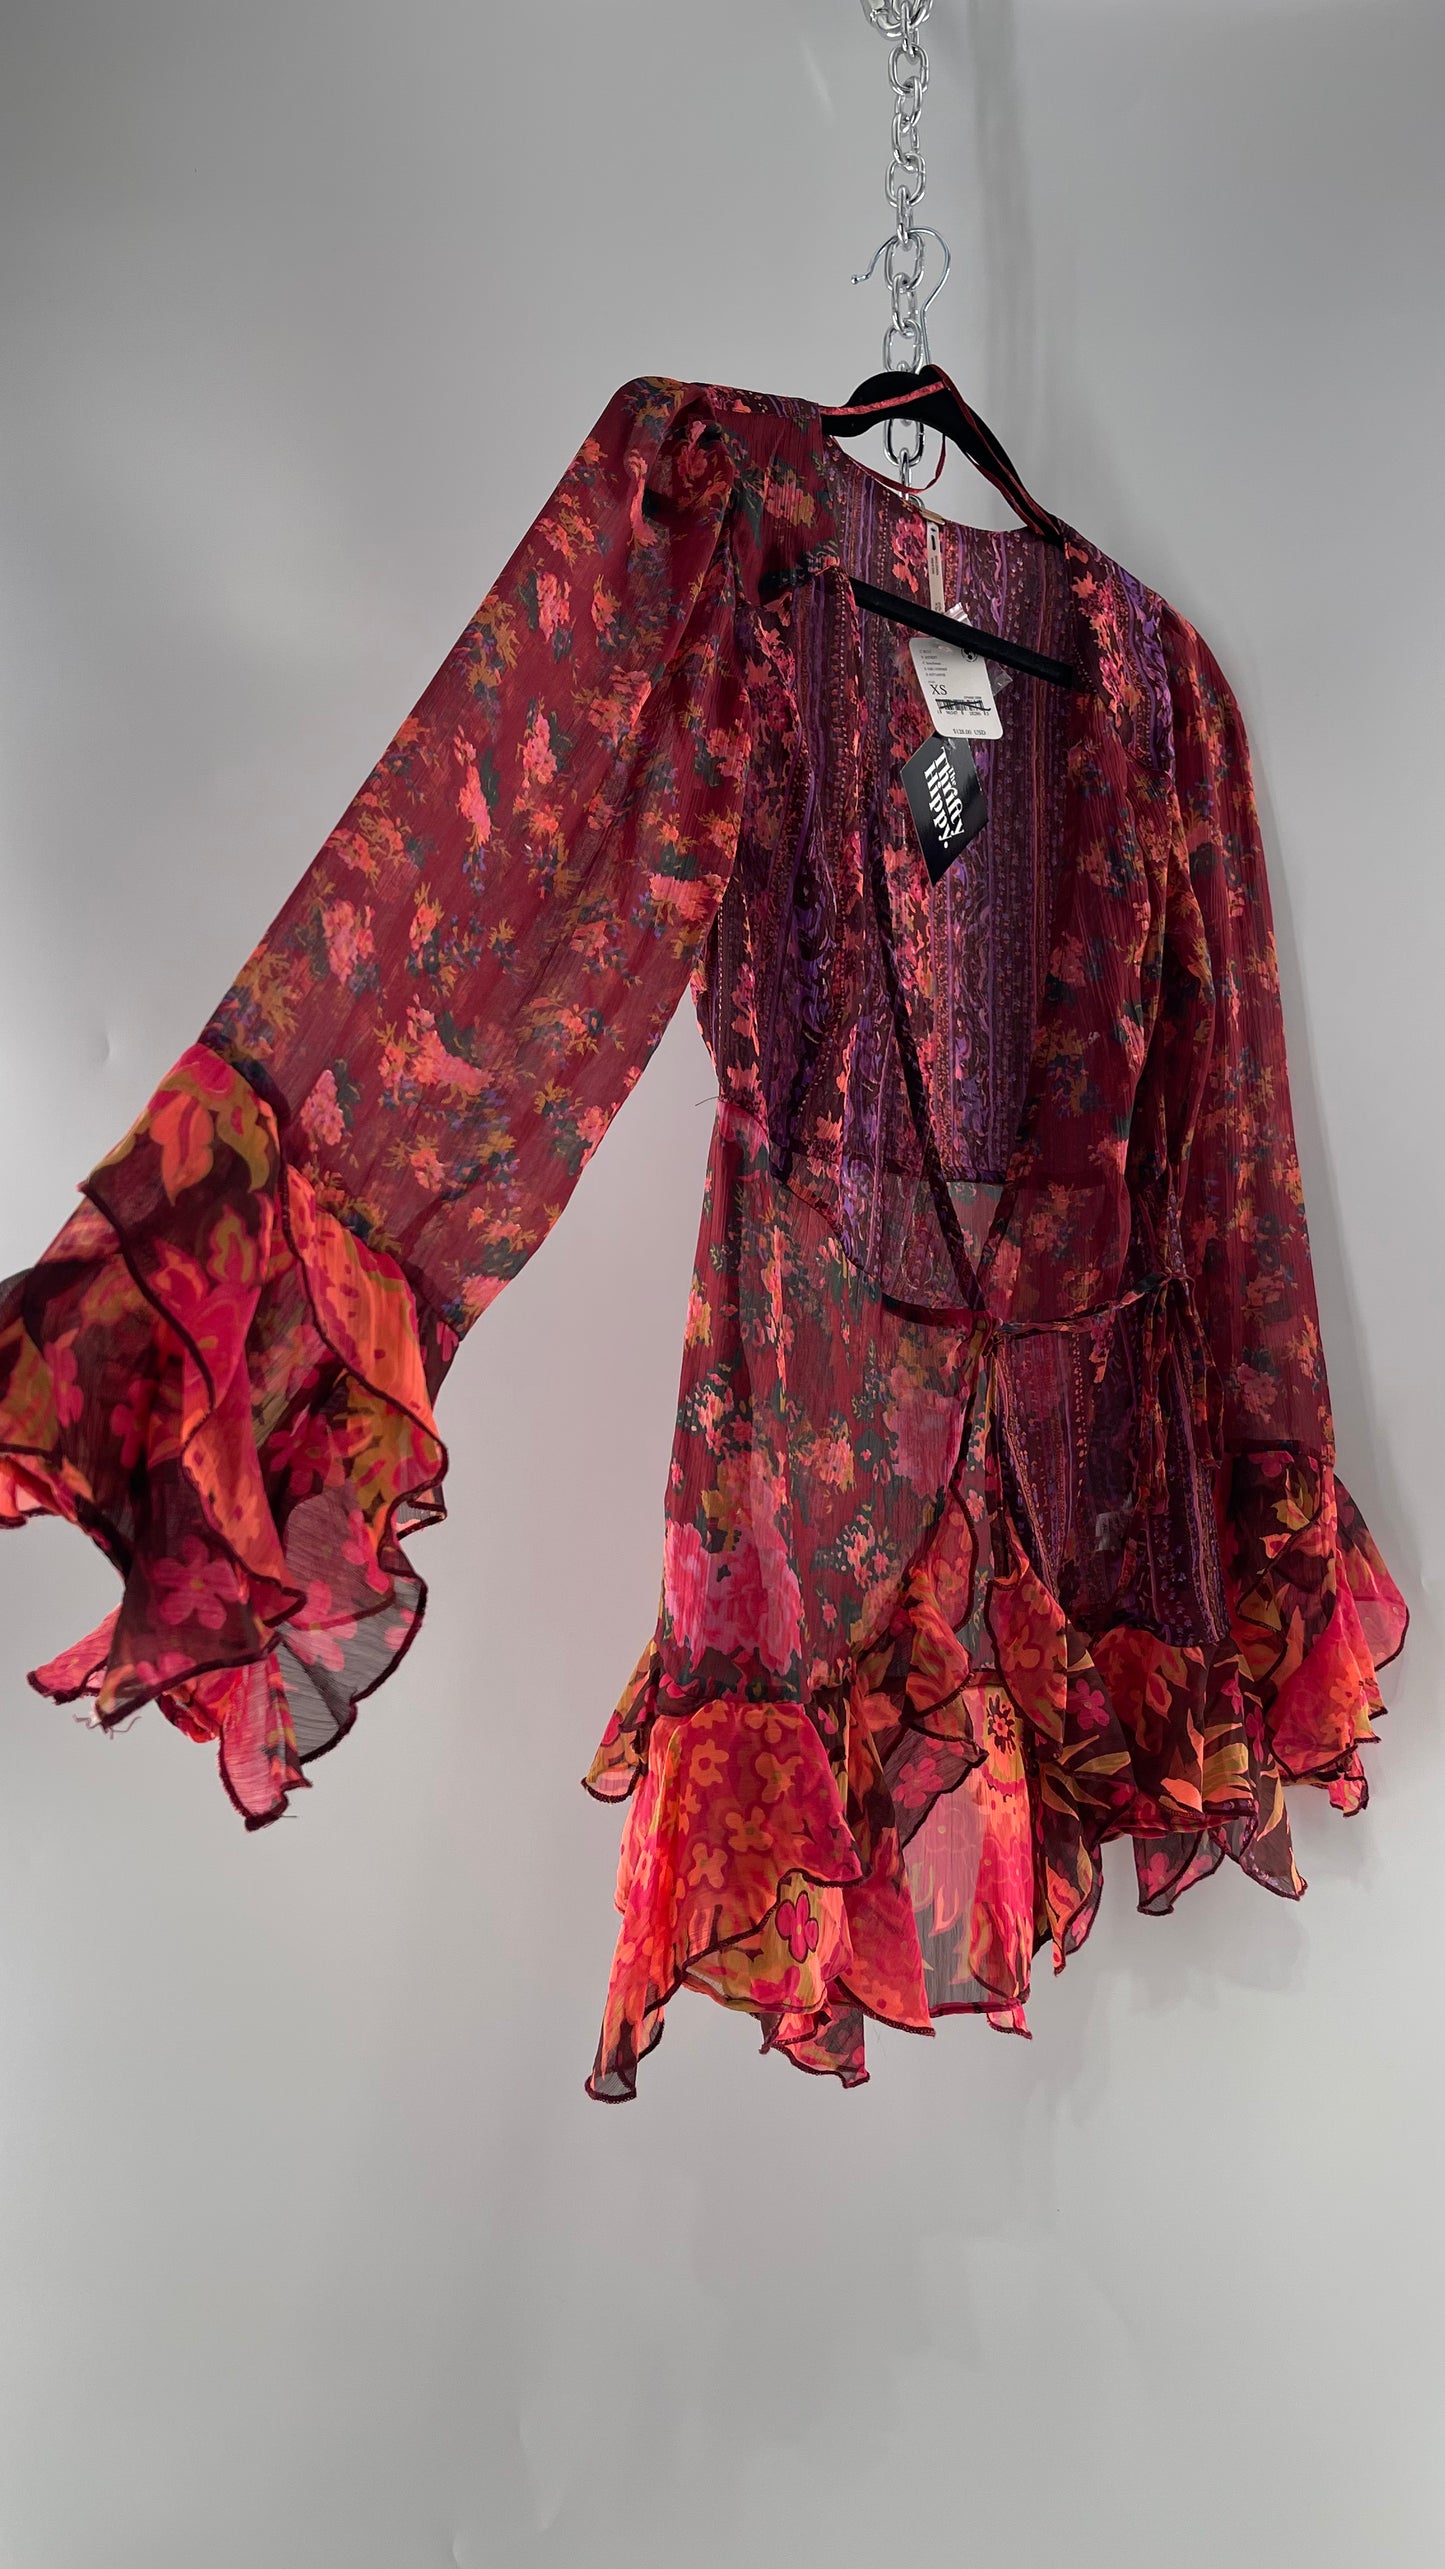 Free People Maroon/Burgundy Red Floral Tie Front Blouse with Ruffled Sleeves and Hem with Tags Attached  (XS)